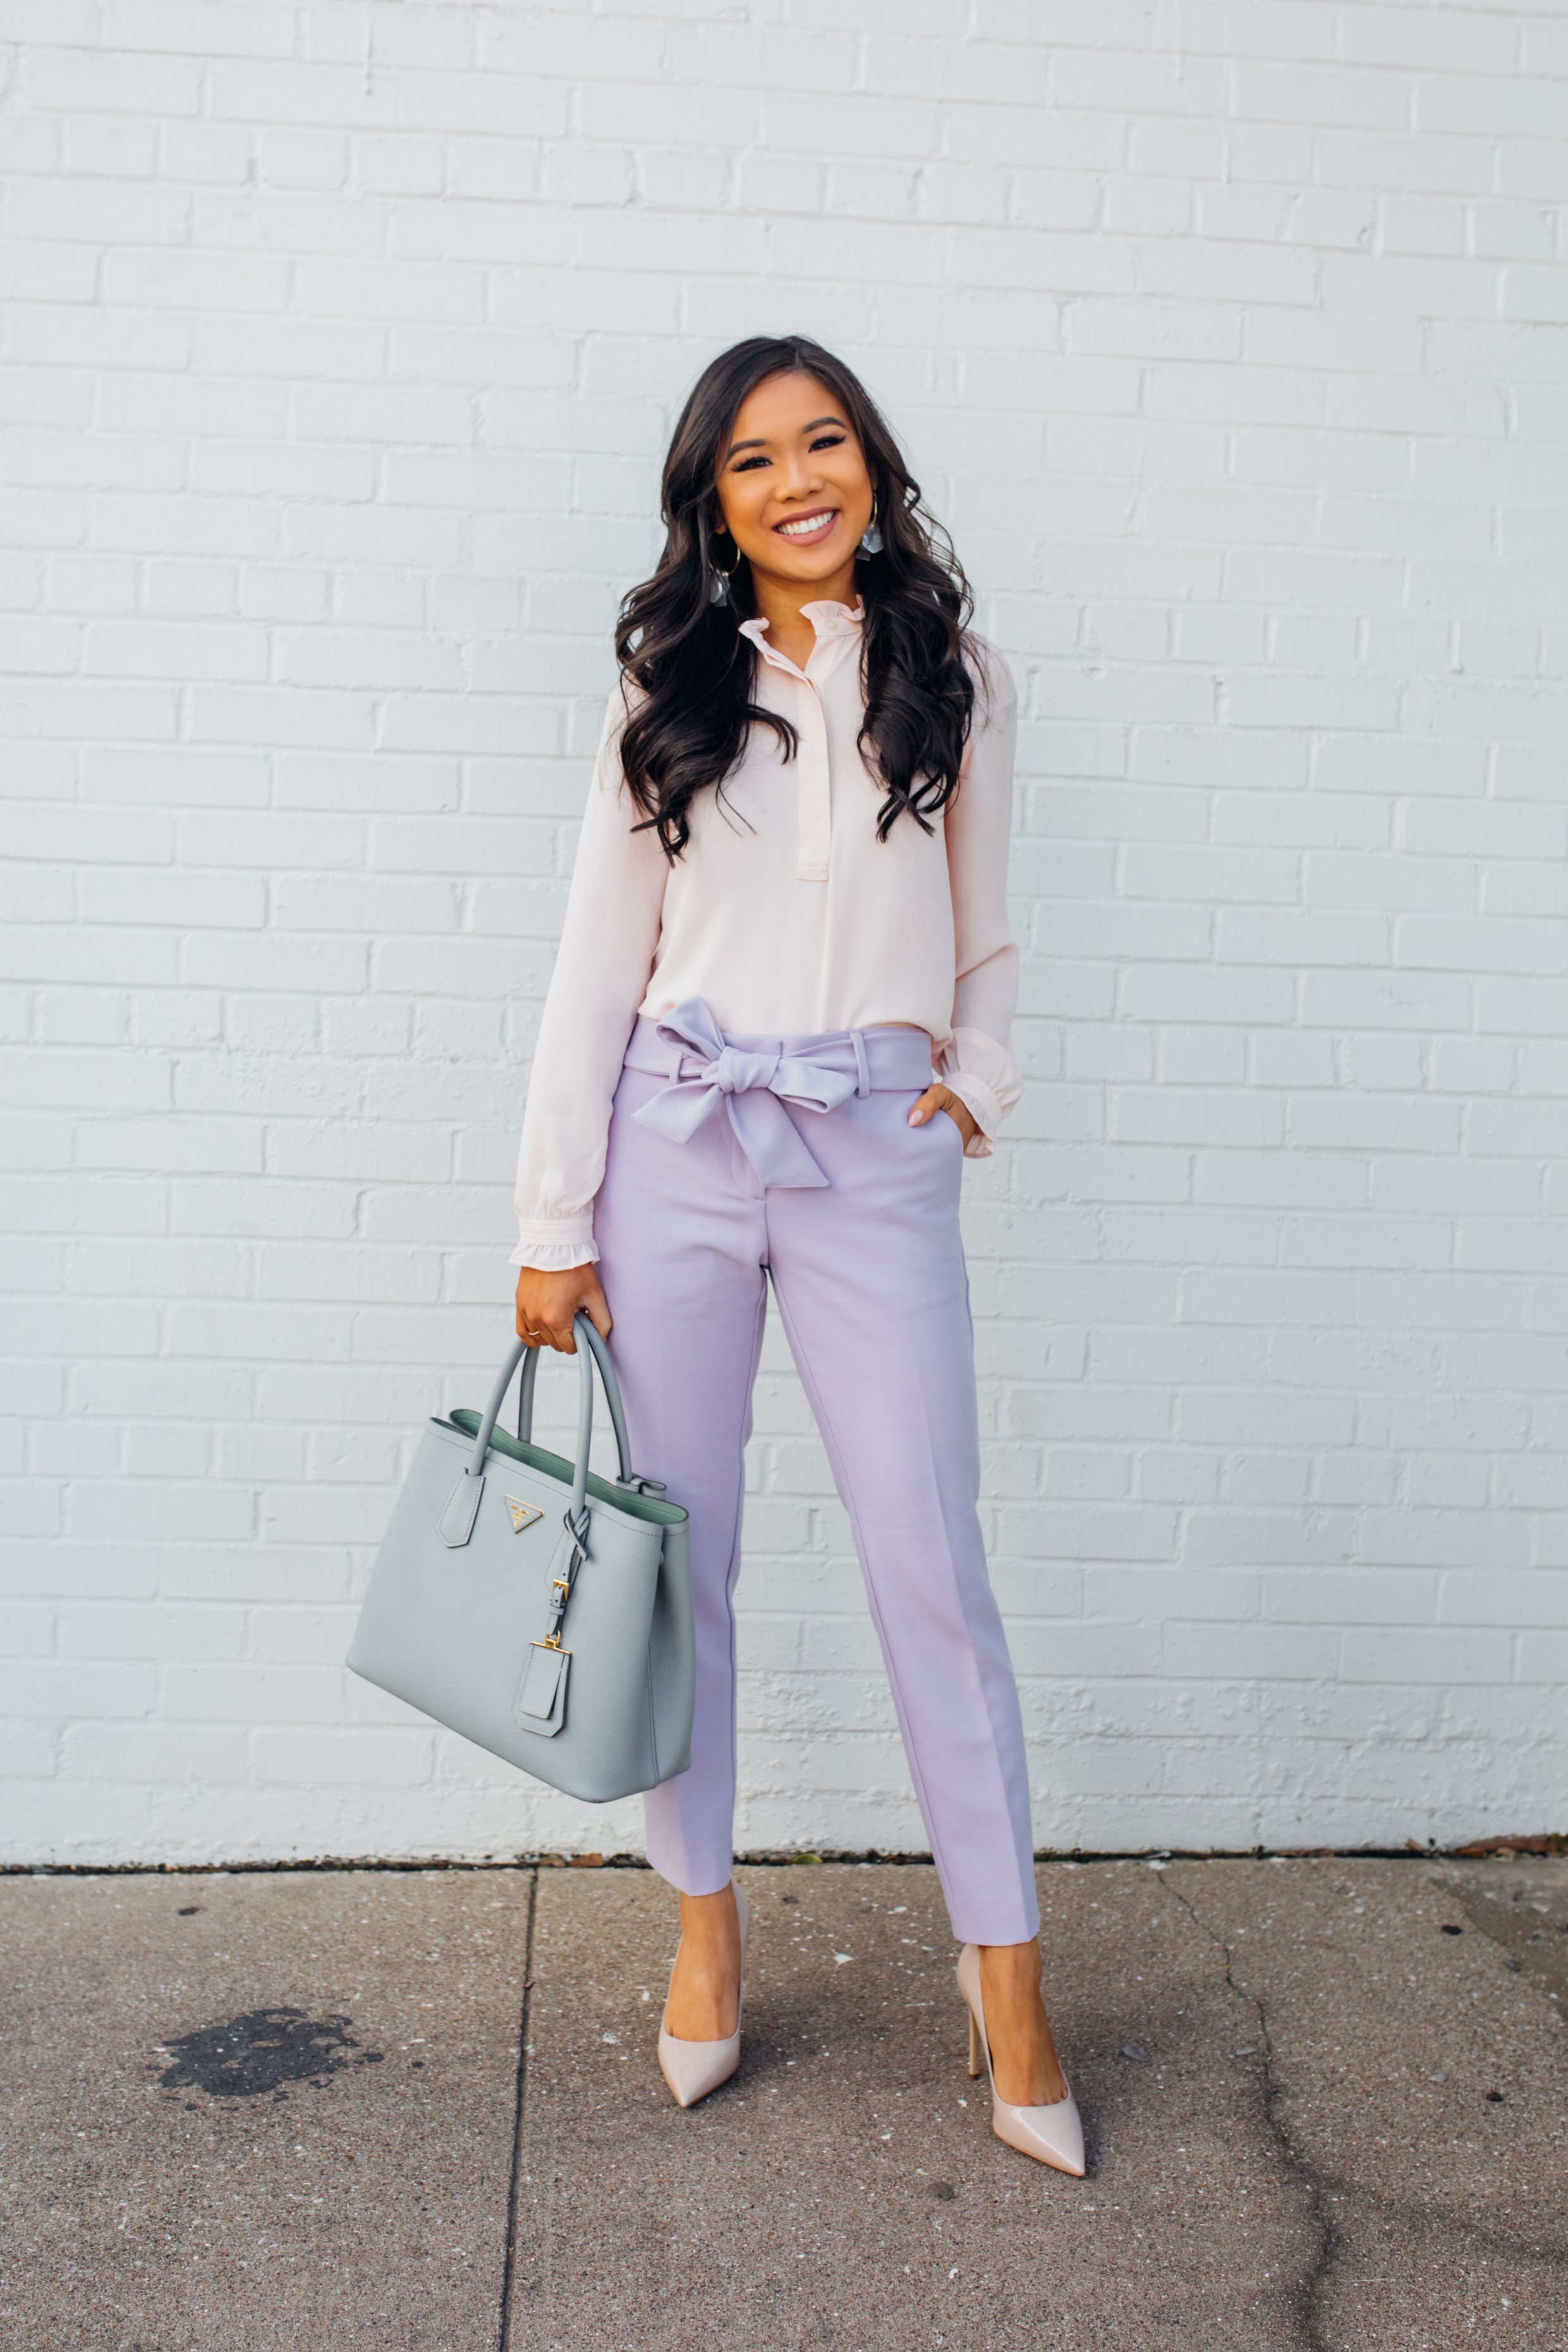 Light Violet Oversized Sweater with Leggings Outfits (3 ideas & outfits)